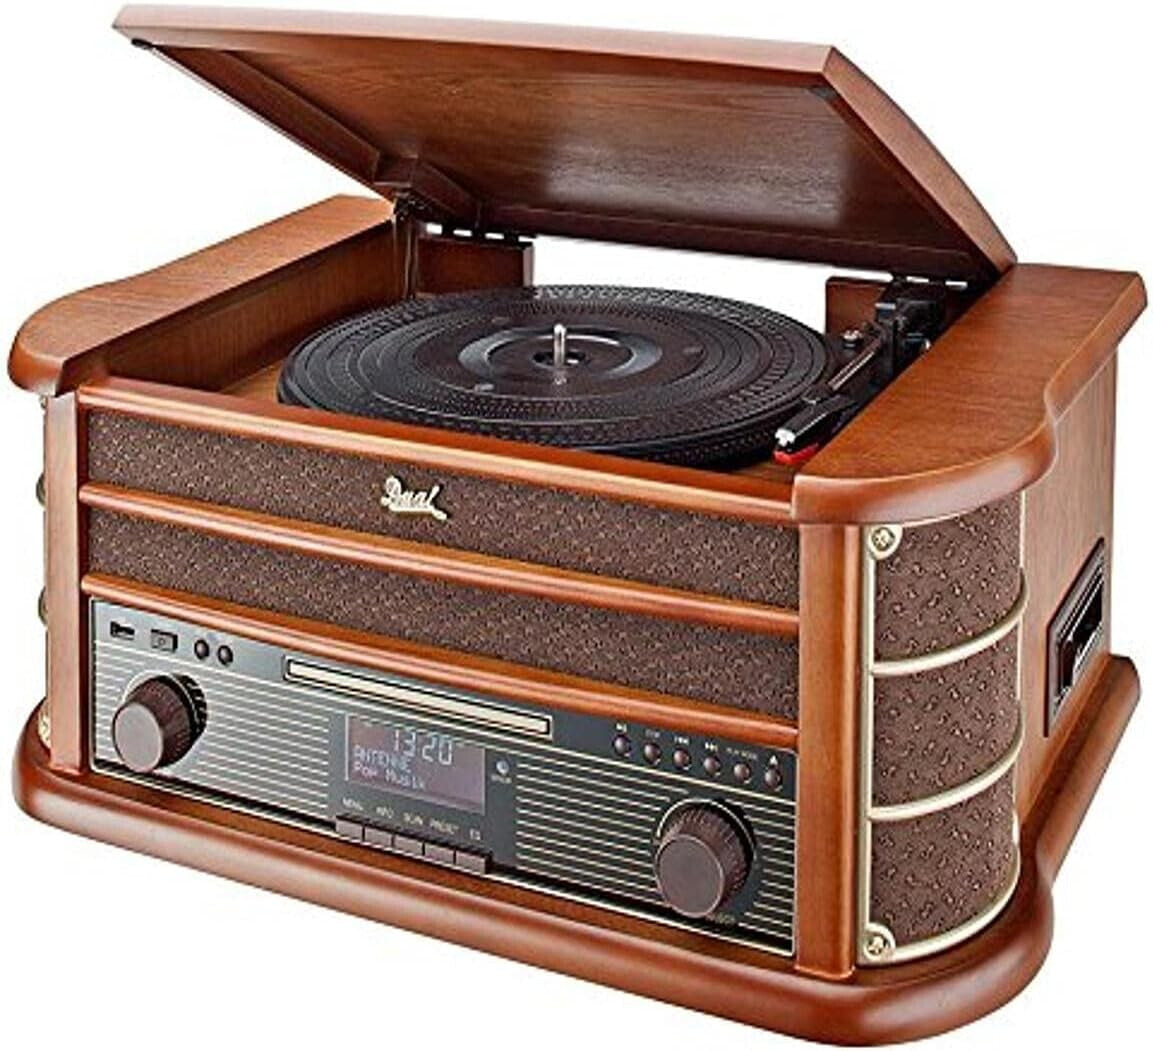 Dual NR 50 and DAB Stereo System with Record Player/UKW/DAB + Radio Cd Mp3/Usb/Kassettenabspieler, AUX-IN, Direct Encoding Function, Remote Control) brown